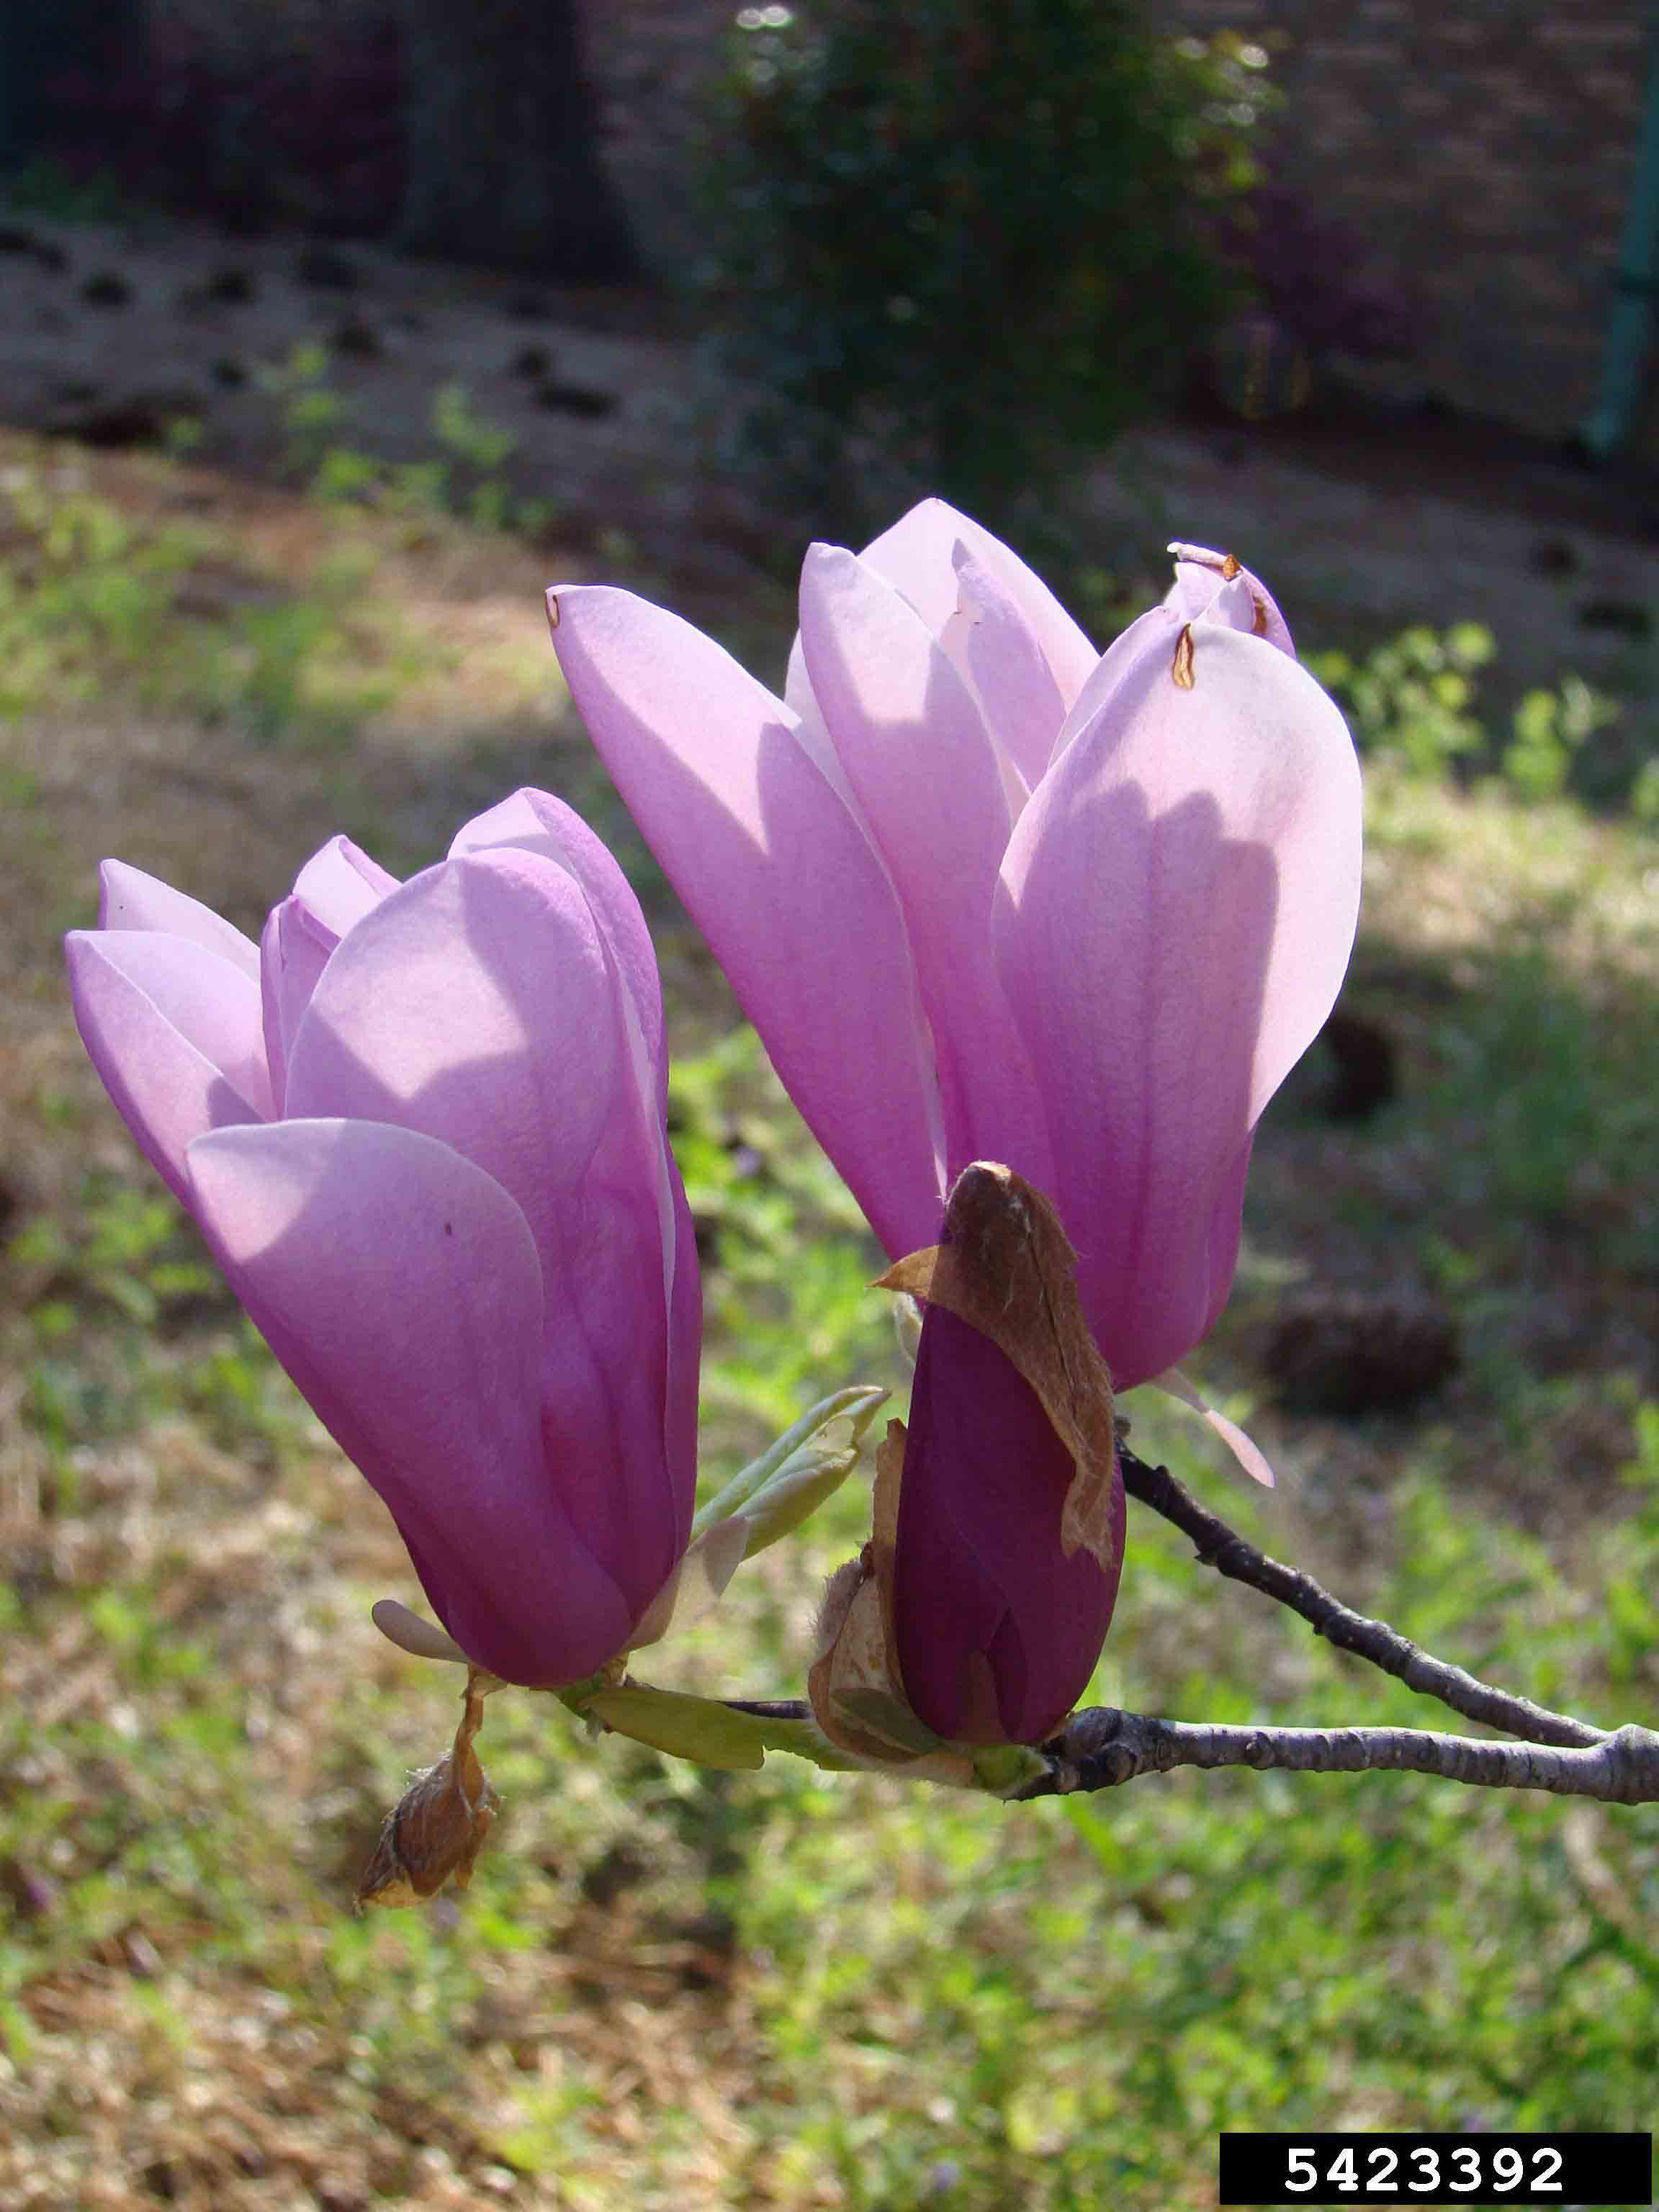 Saucer magnolia flowers, upright on branch